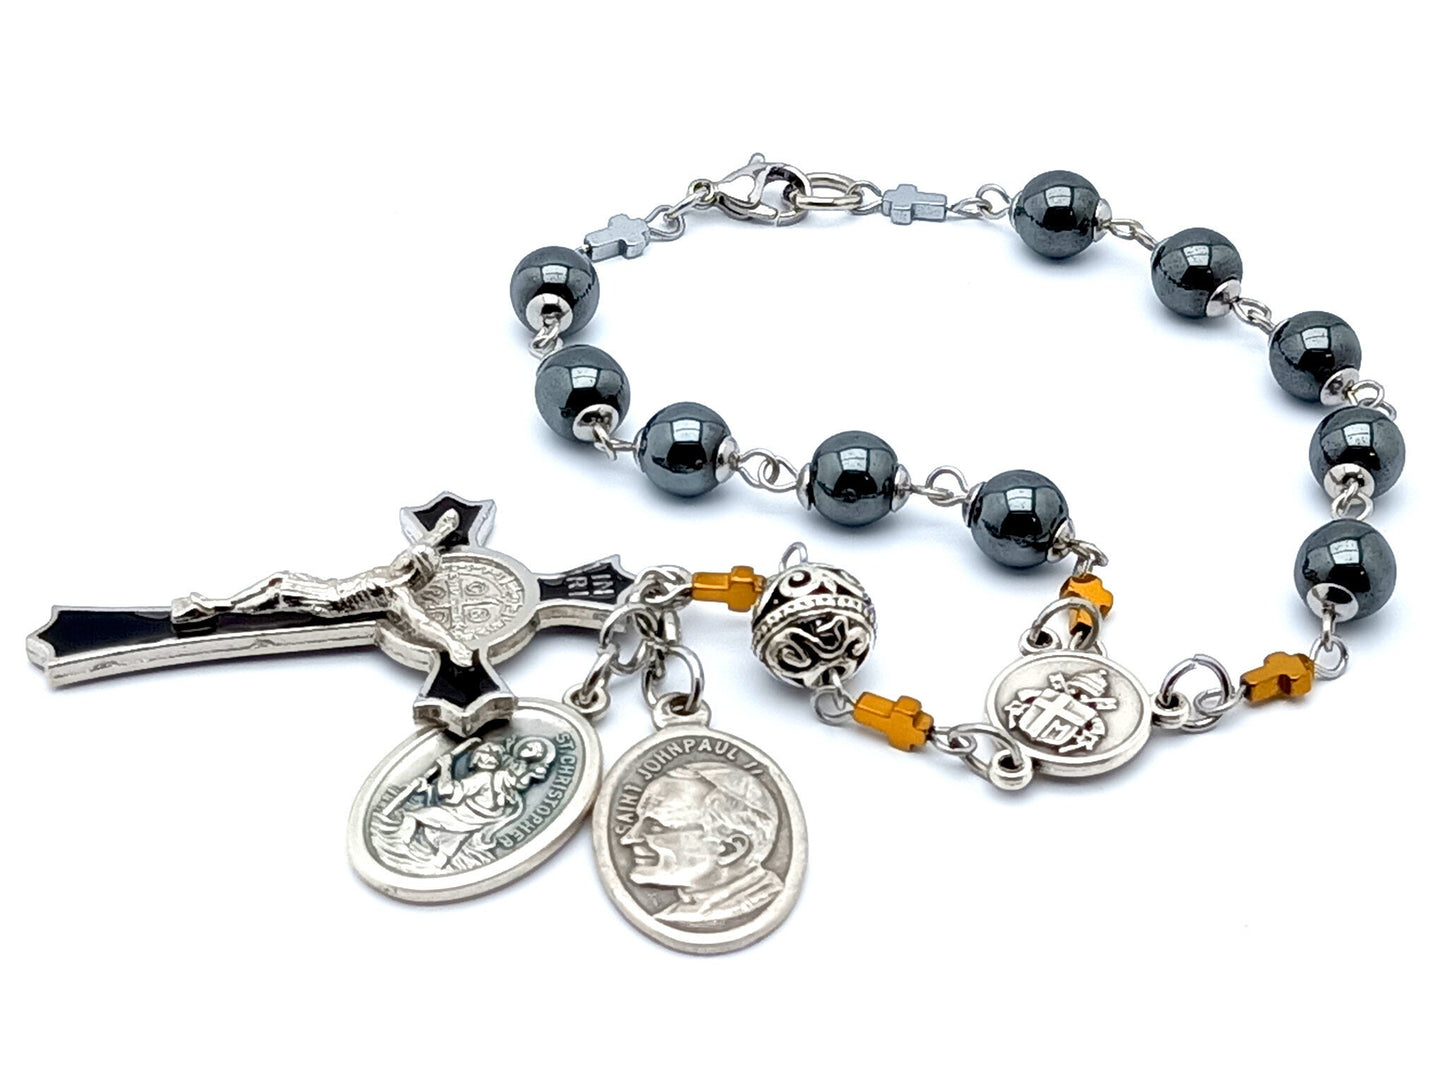 Saint John Paul II Papal unique rosary beads with hematite gemstone beads and Saint Christopher medal and Saint Benedict crucifix.